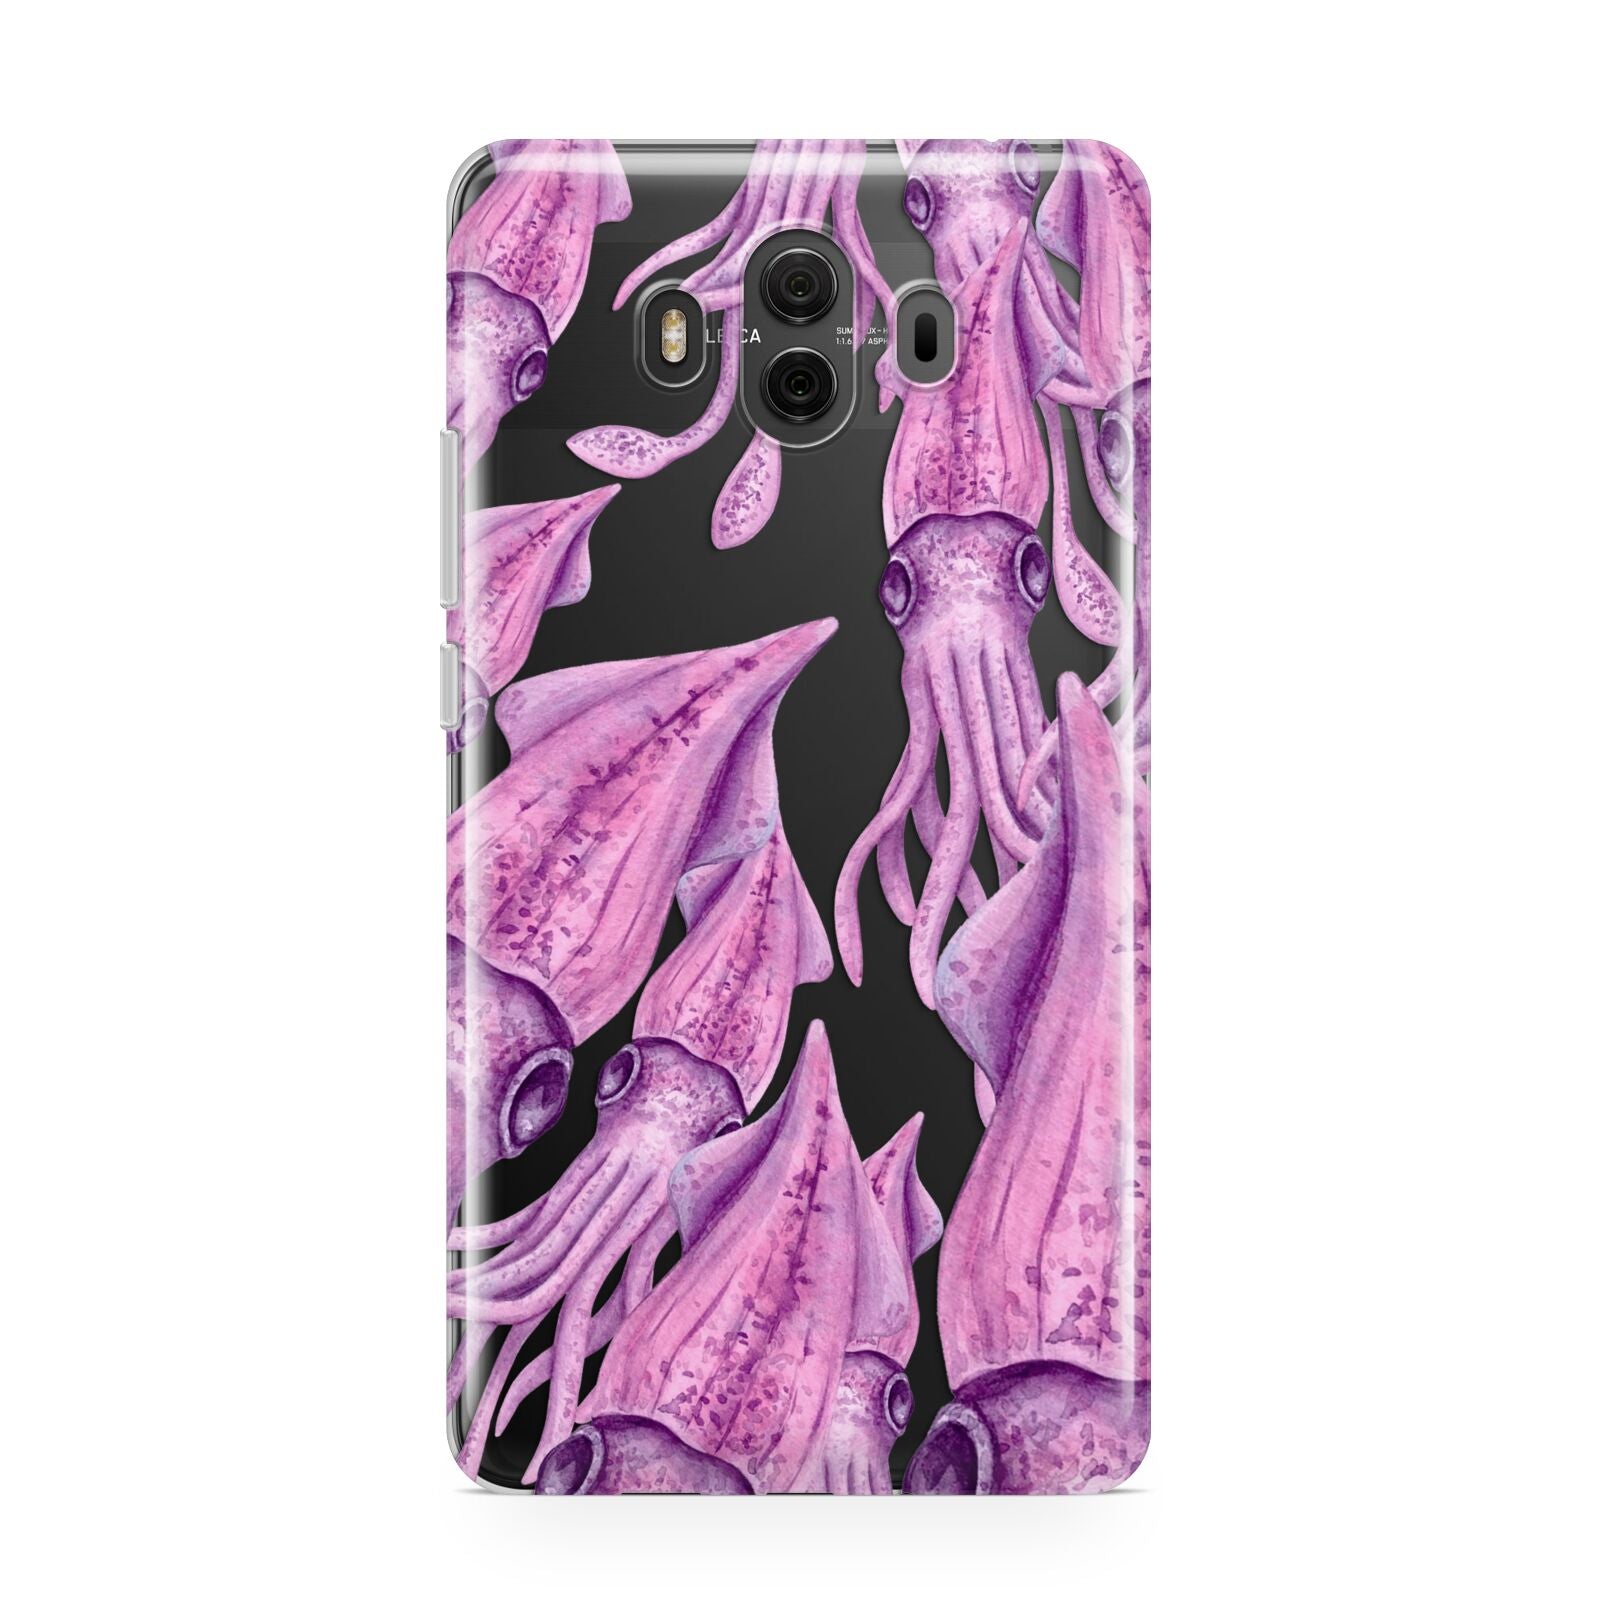 Squid Huawei Mate 10 Protective Phone Case